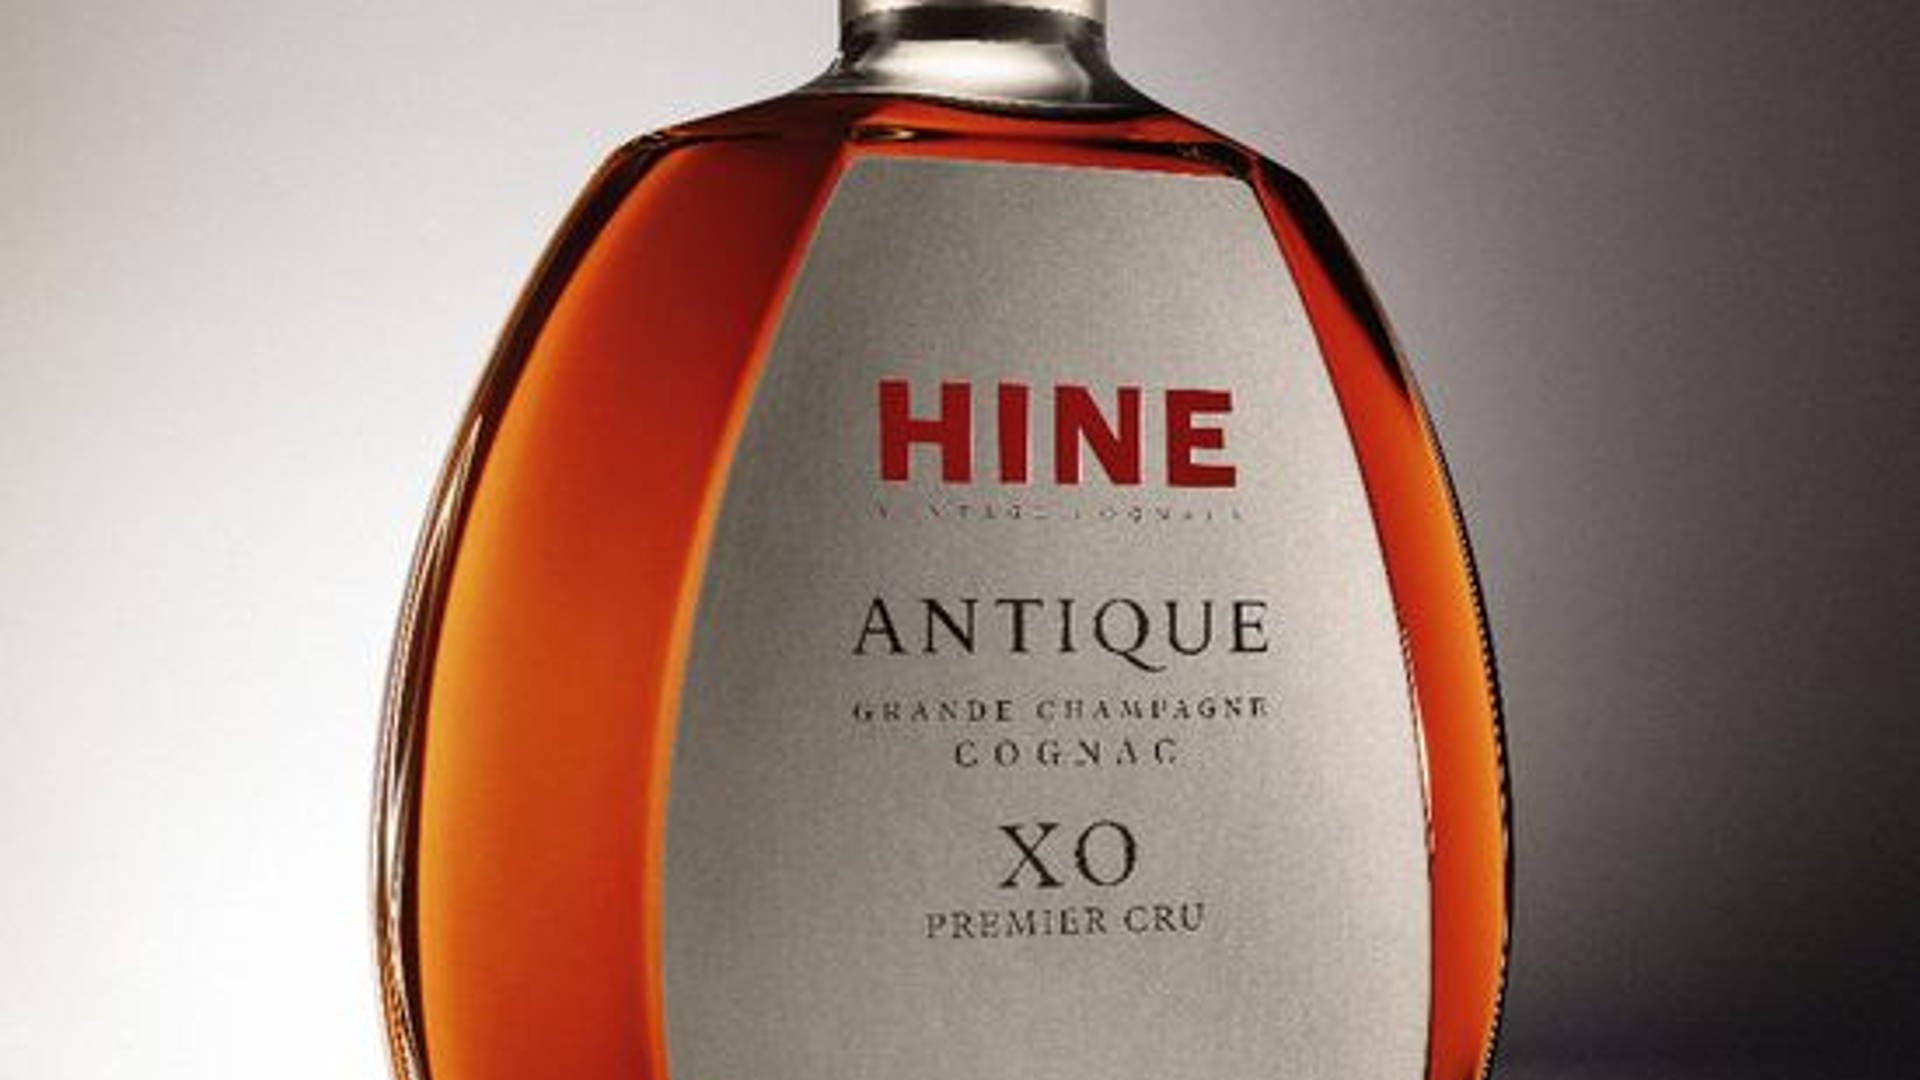 Featured image for Before & After: Hine Antique XO Cognac